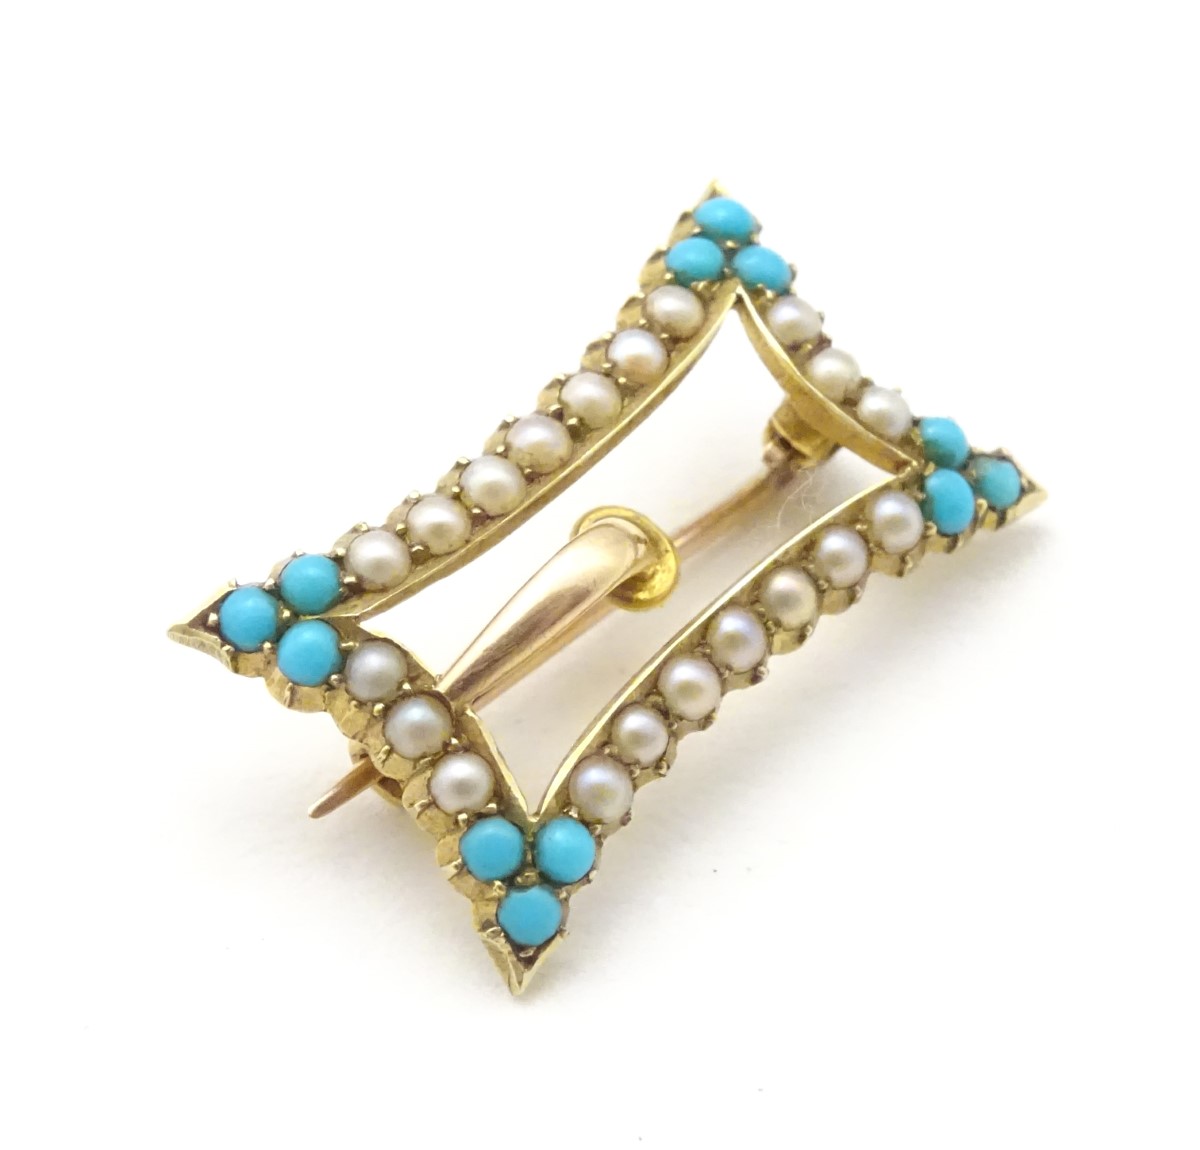 A late 19thC / early 20thC 15ct gold buckle formed brooch set with turquoise and seed pearl.